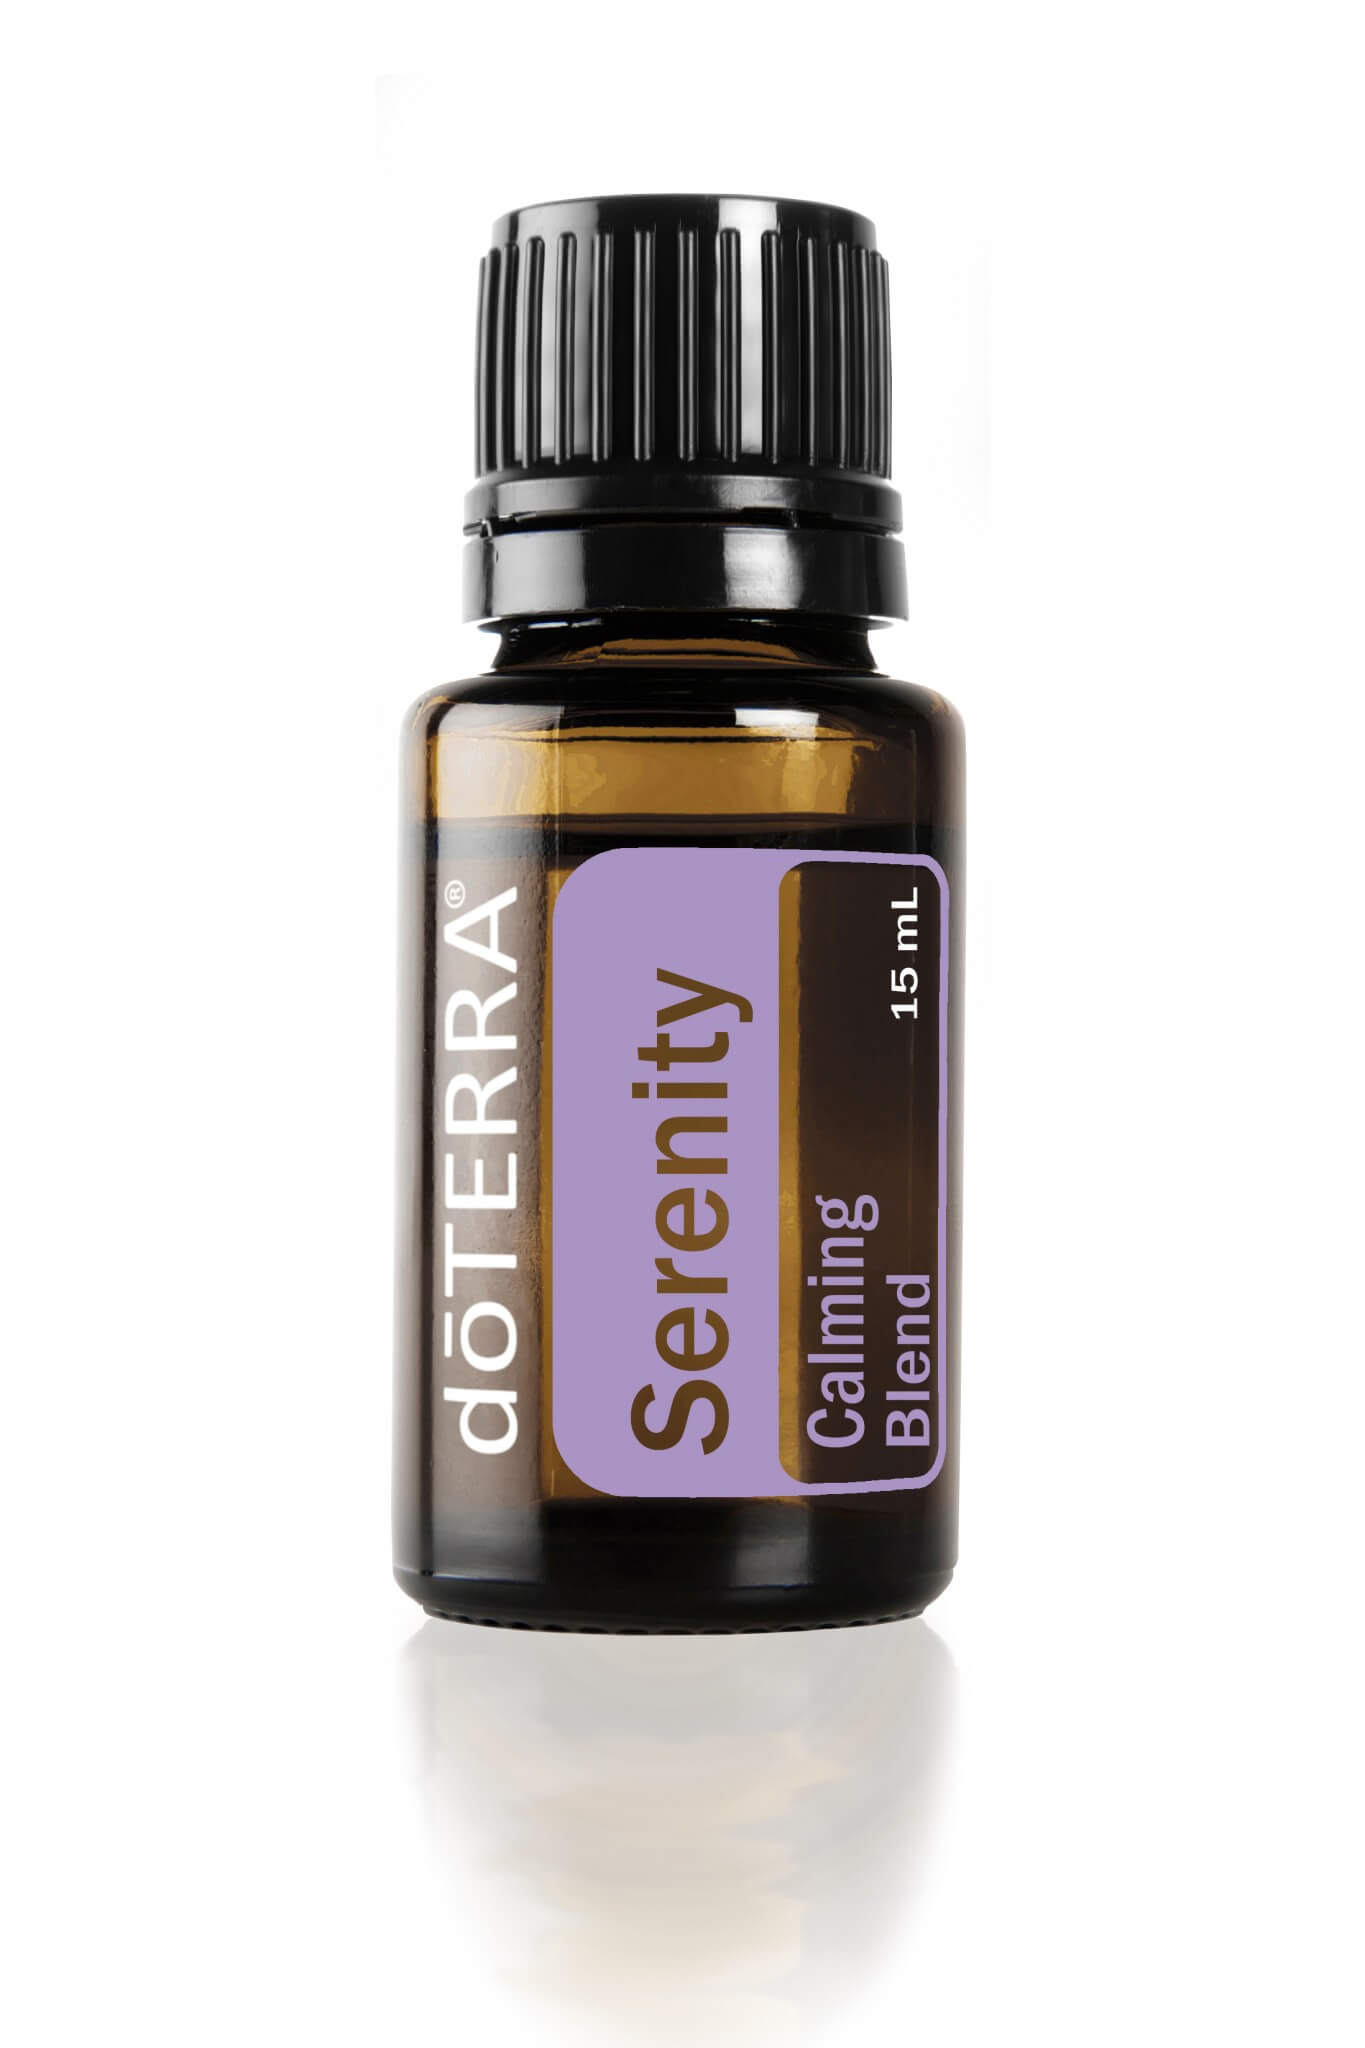 Serenity essential oil to help quit smoking